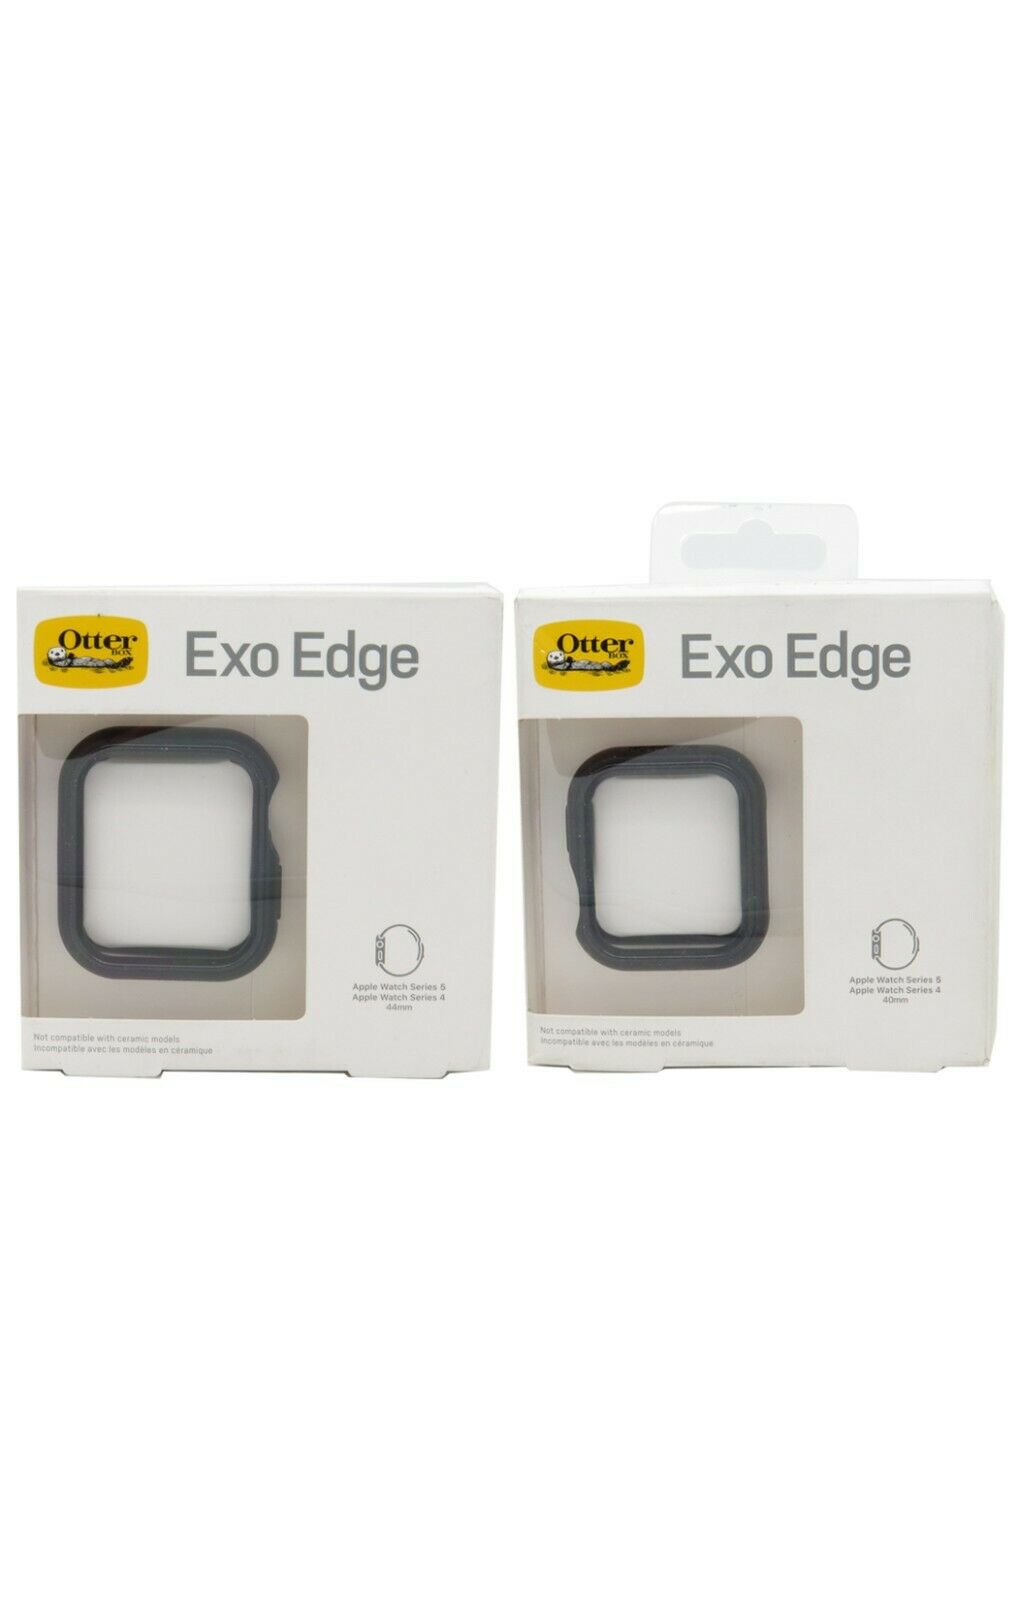 Otterbox Exo Edge Case For Apple Watch Series 4 & 5 40mm Or 44mm Black